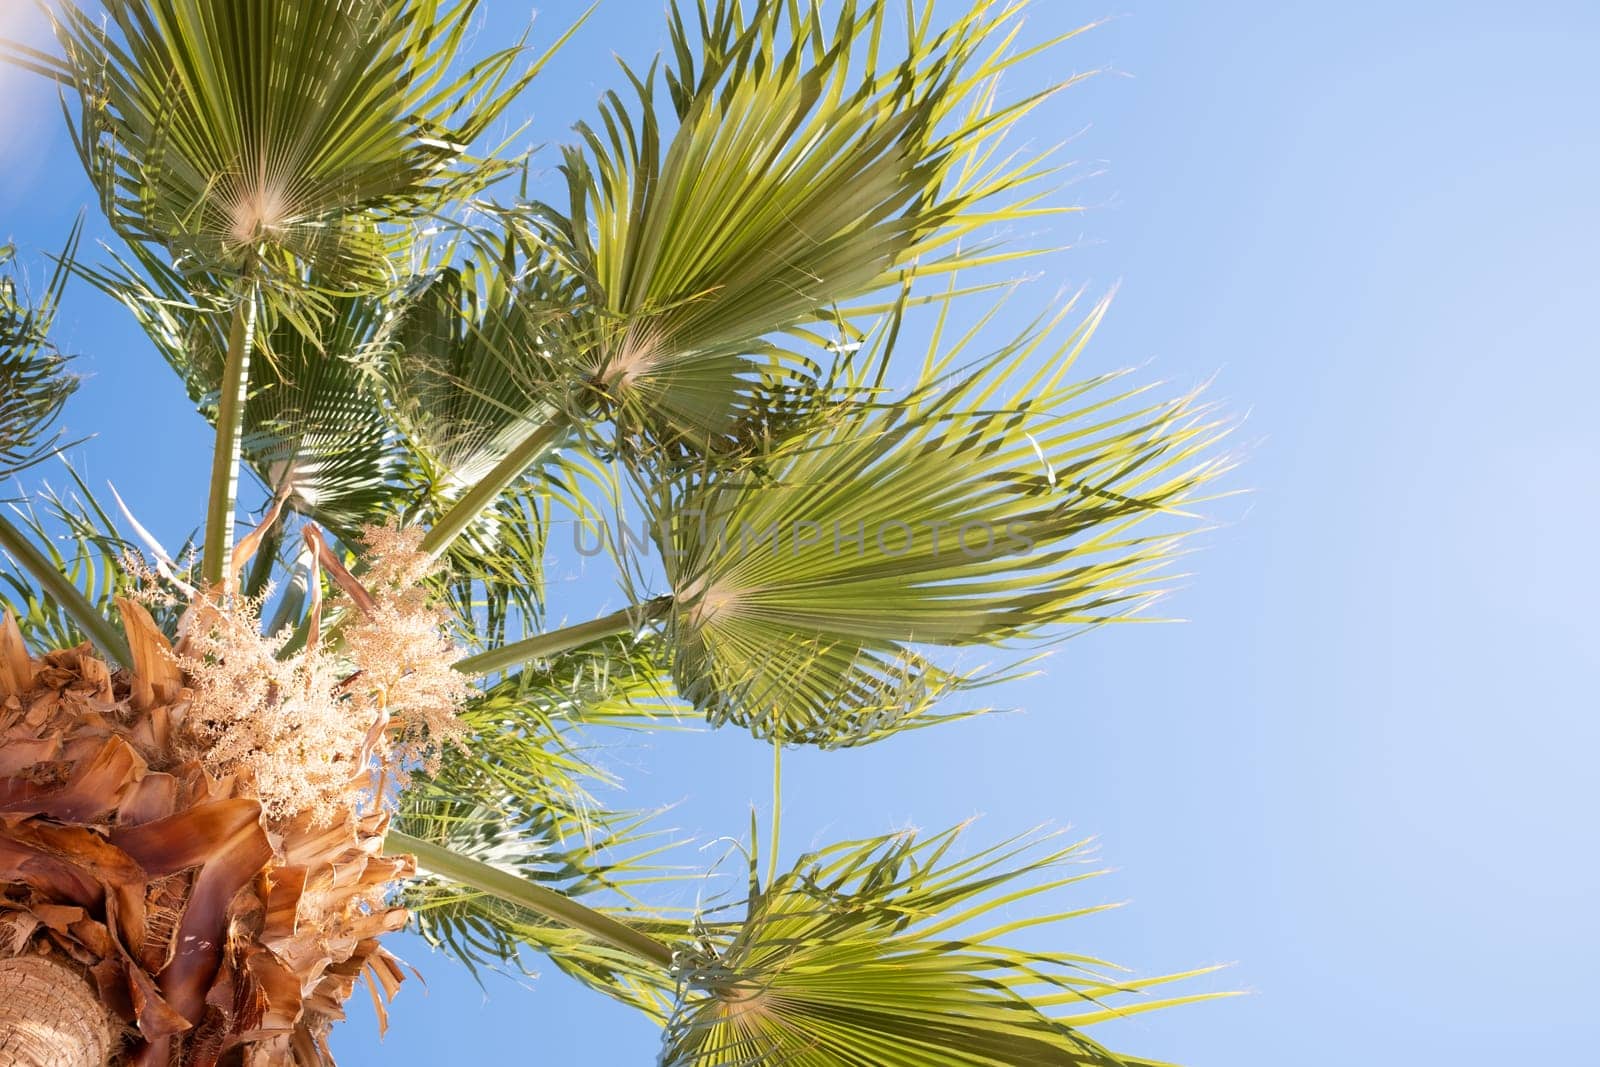 From below palm tree with green branches against cloudless blue sky in sunshine